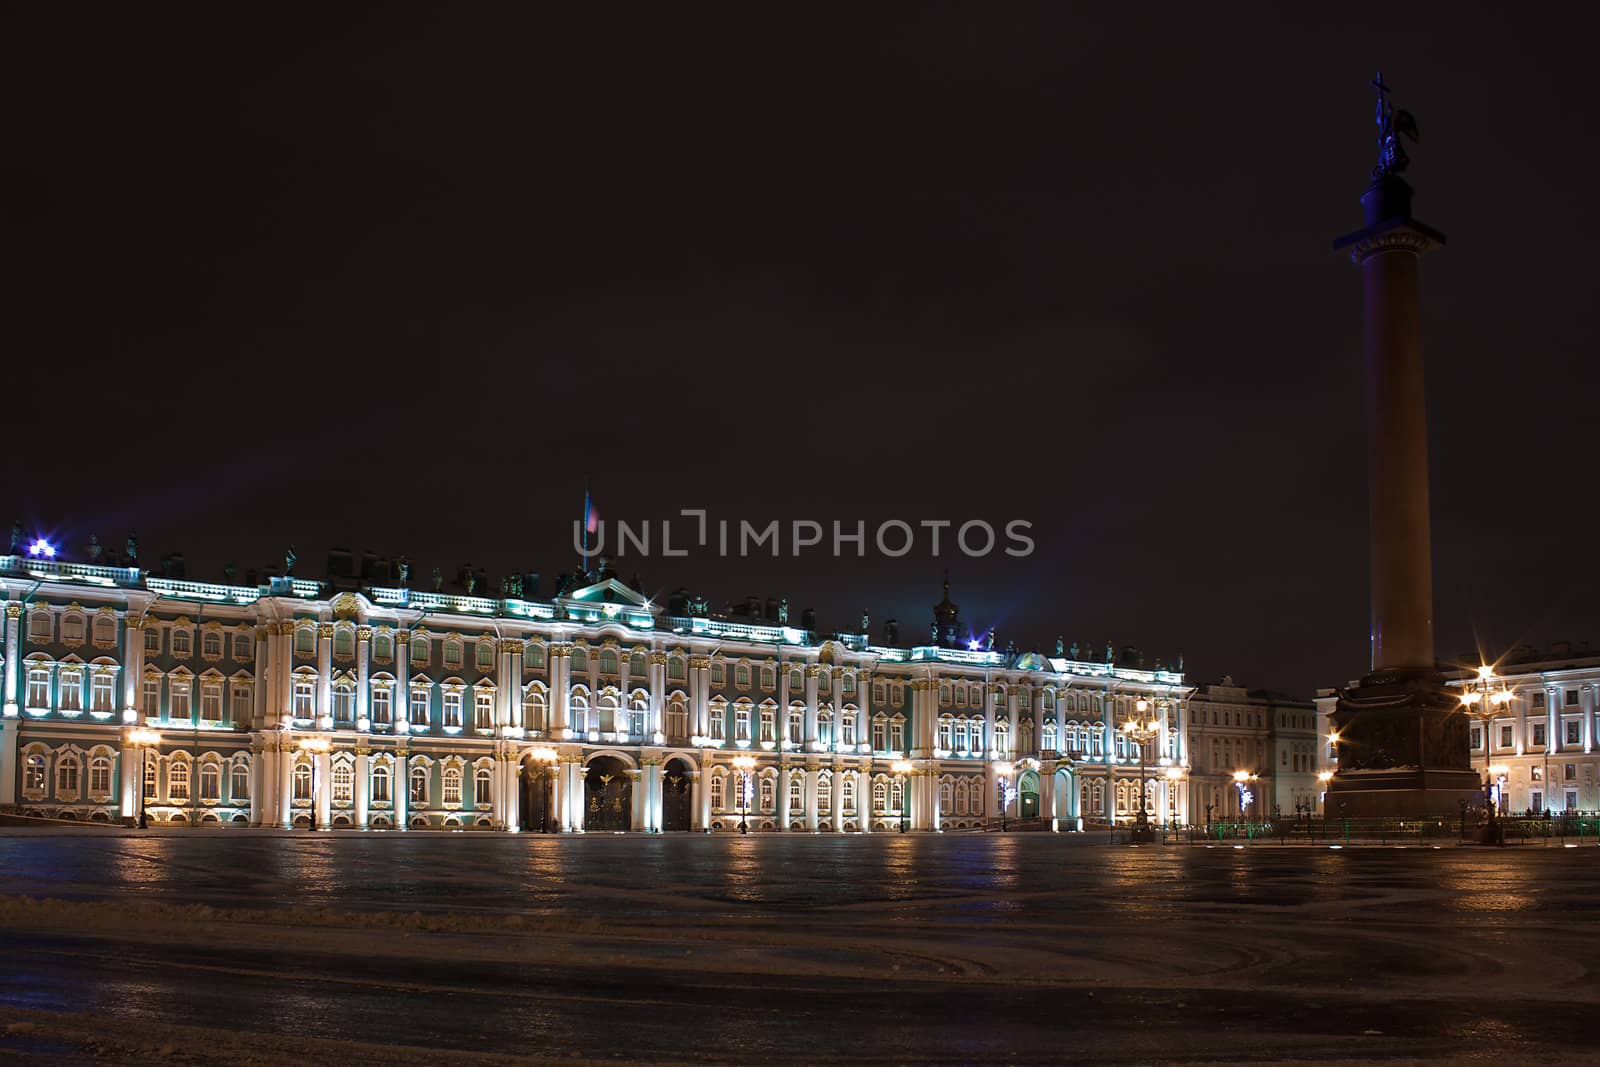 Winter Palace and Alexander Column on Palace Square in St. Petersburg, Russia